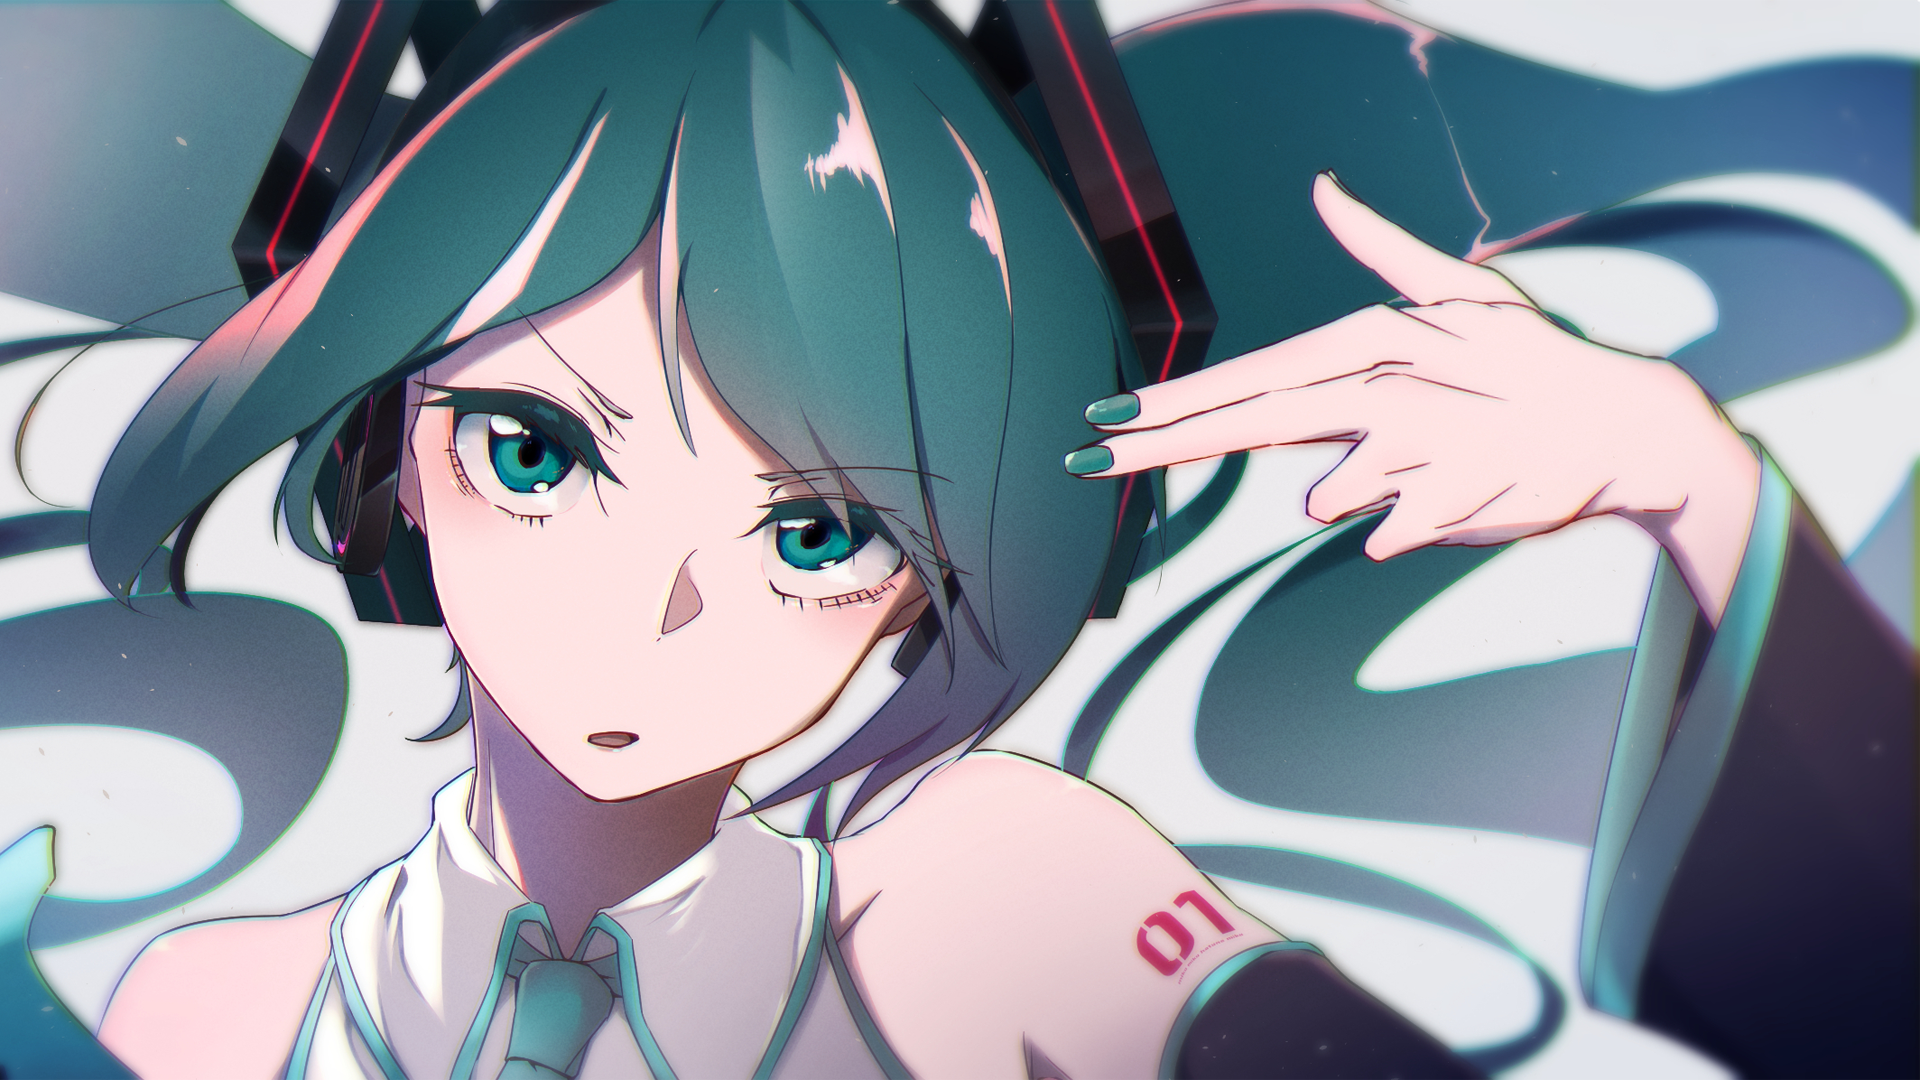 Anime 1920x1080 anime anime girls Hatsune Miku turquoise headsets Vocaloid twintails